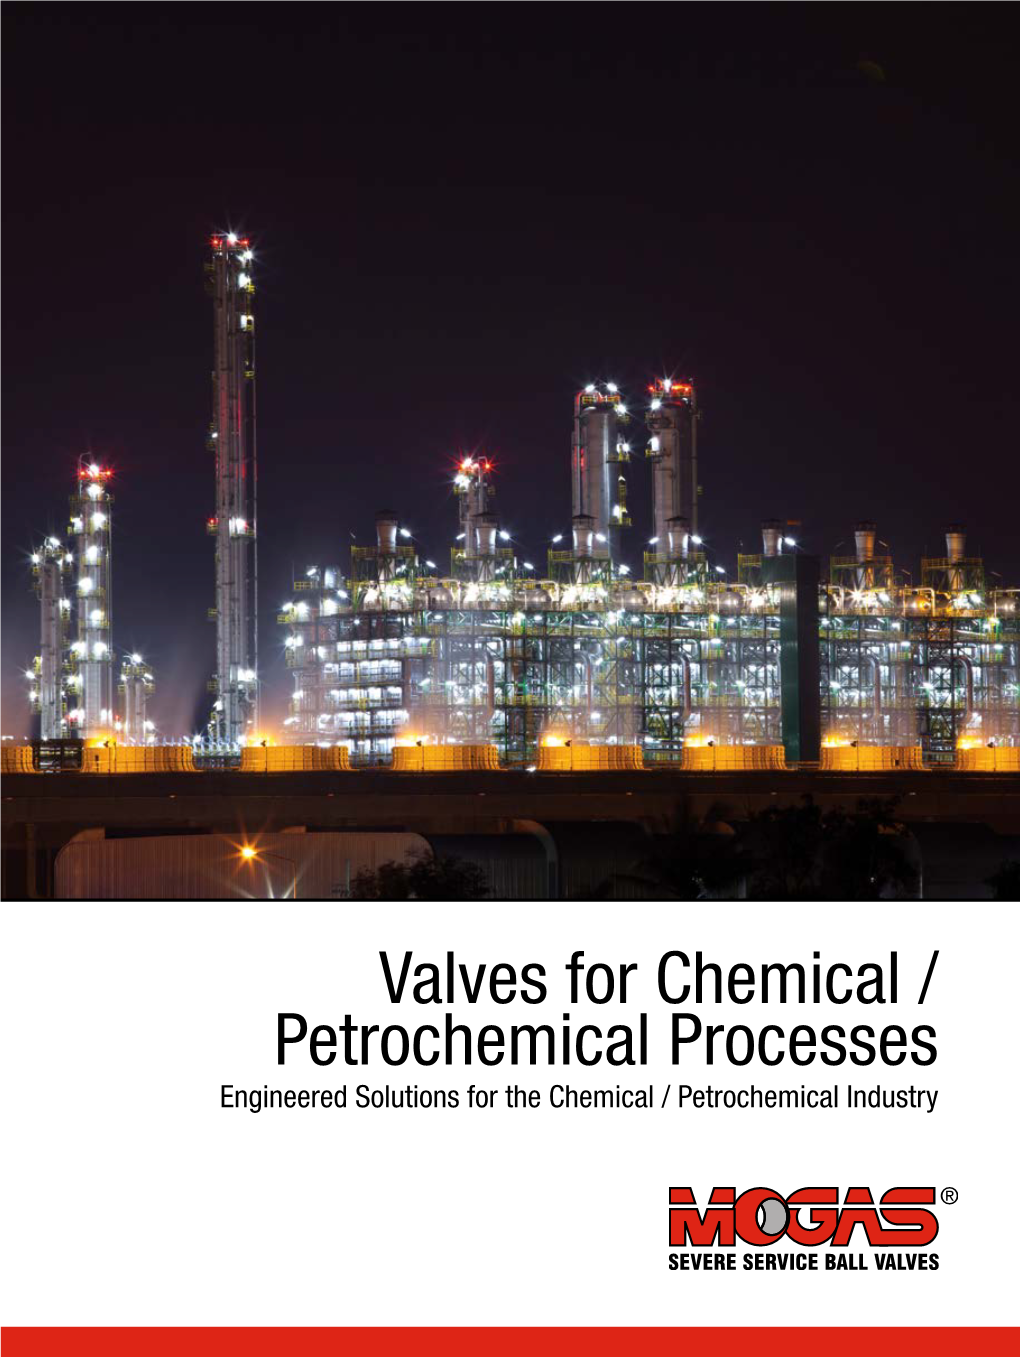 Valves for Chemical / Petrochemical Processes